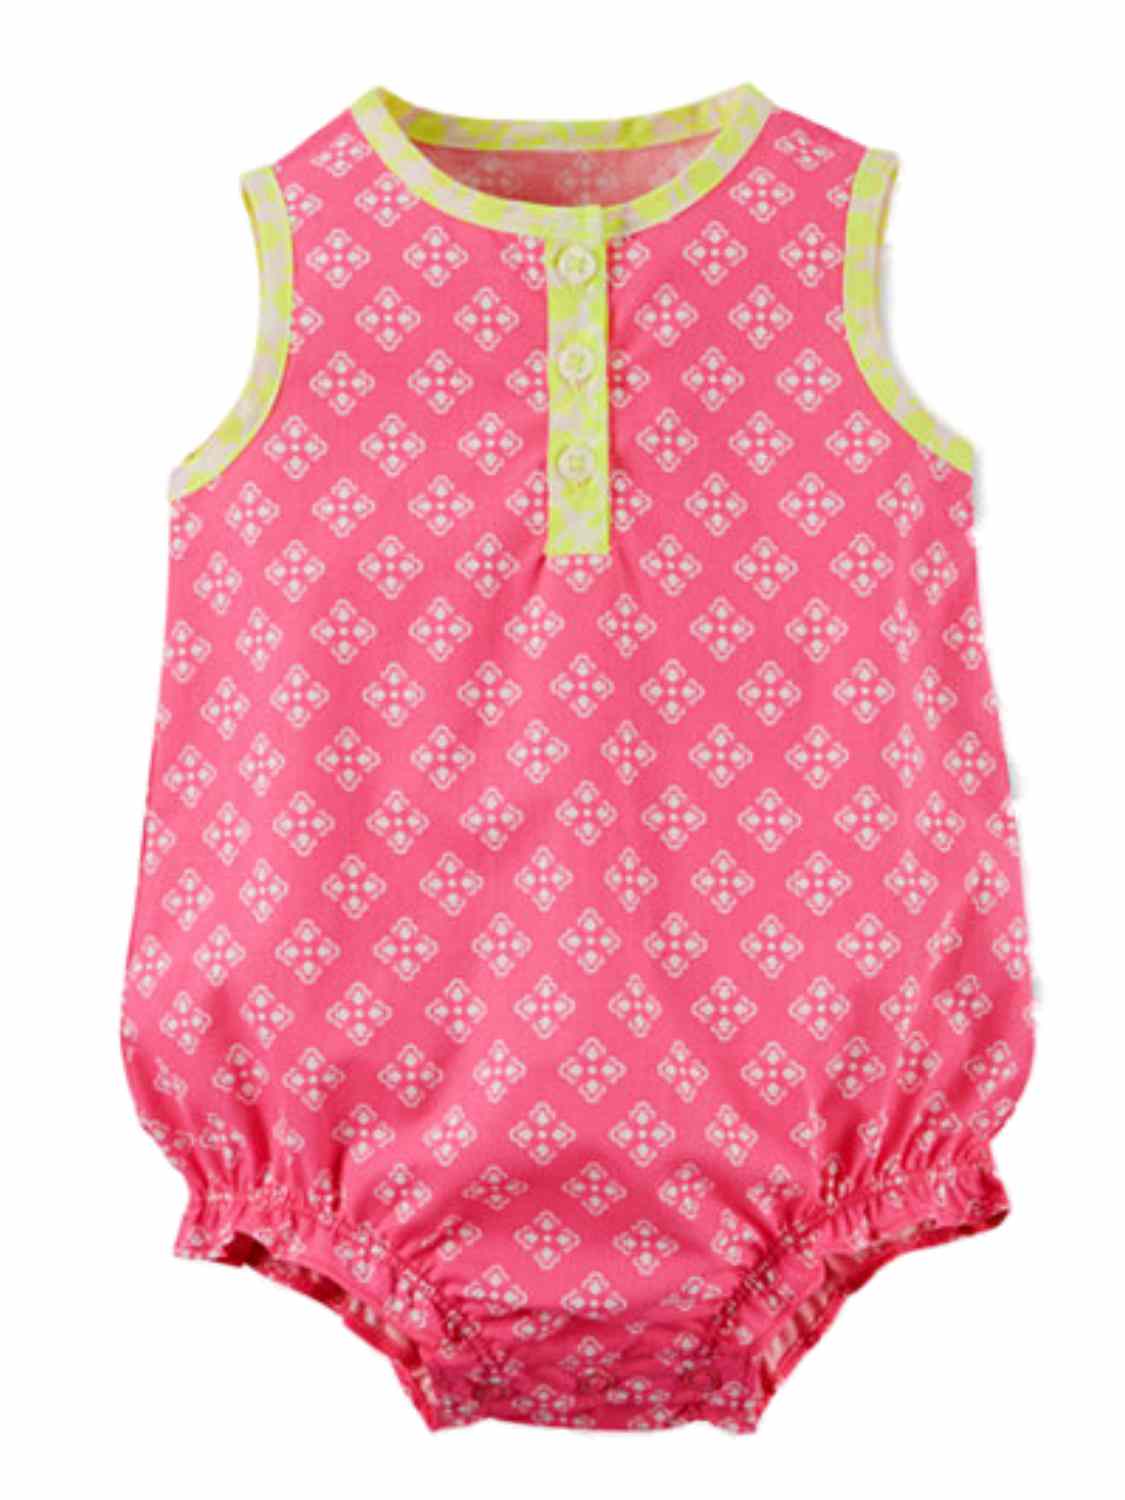 Carter's Carters Infant Girls Pink & Yellow Floral Romper Snap-bottom Bodysuit